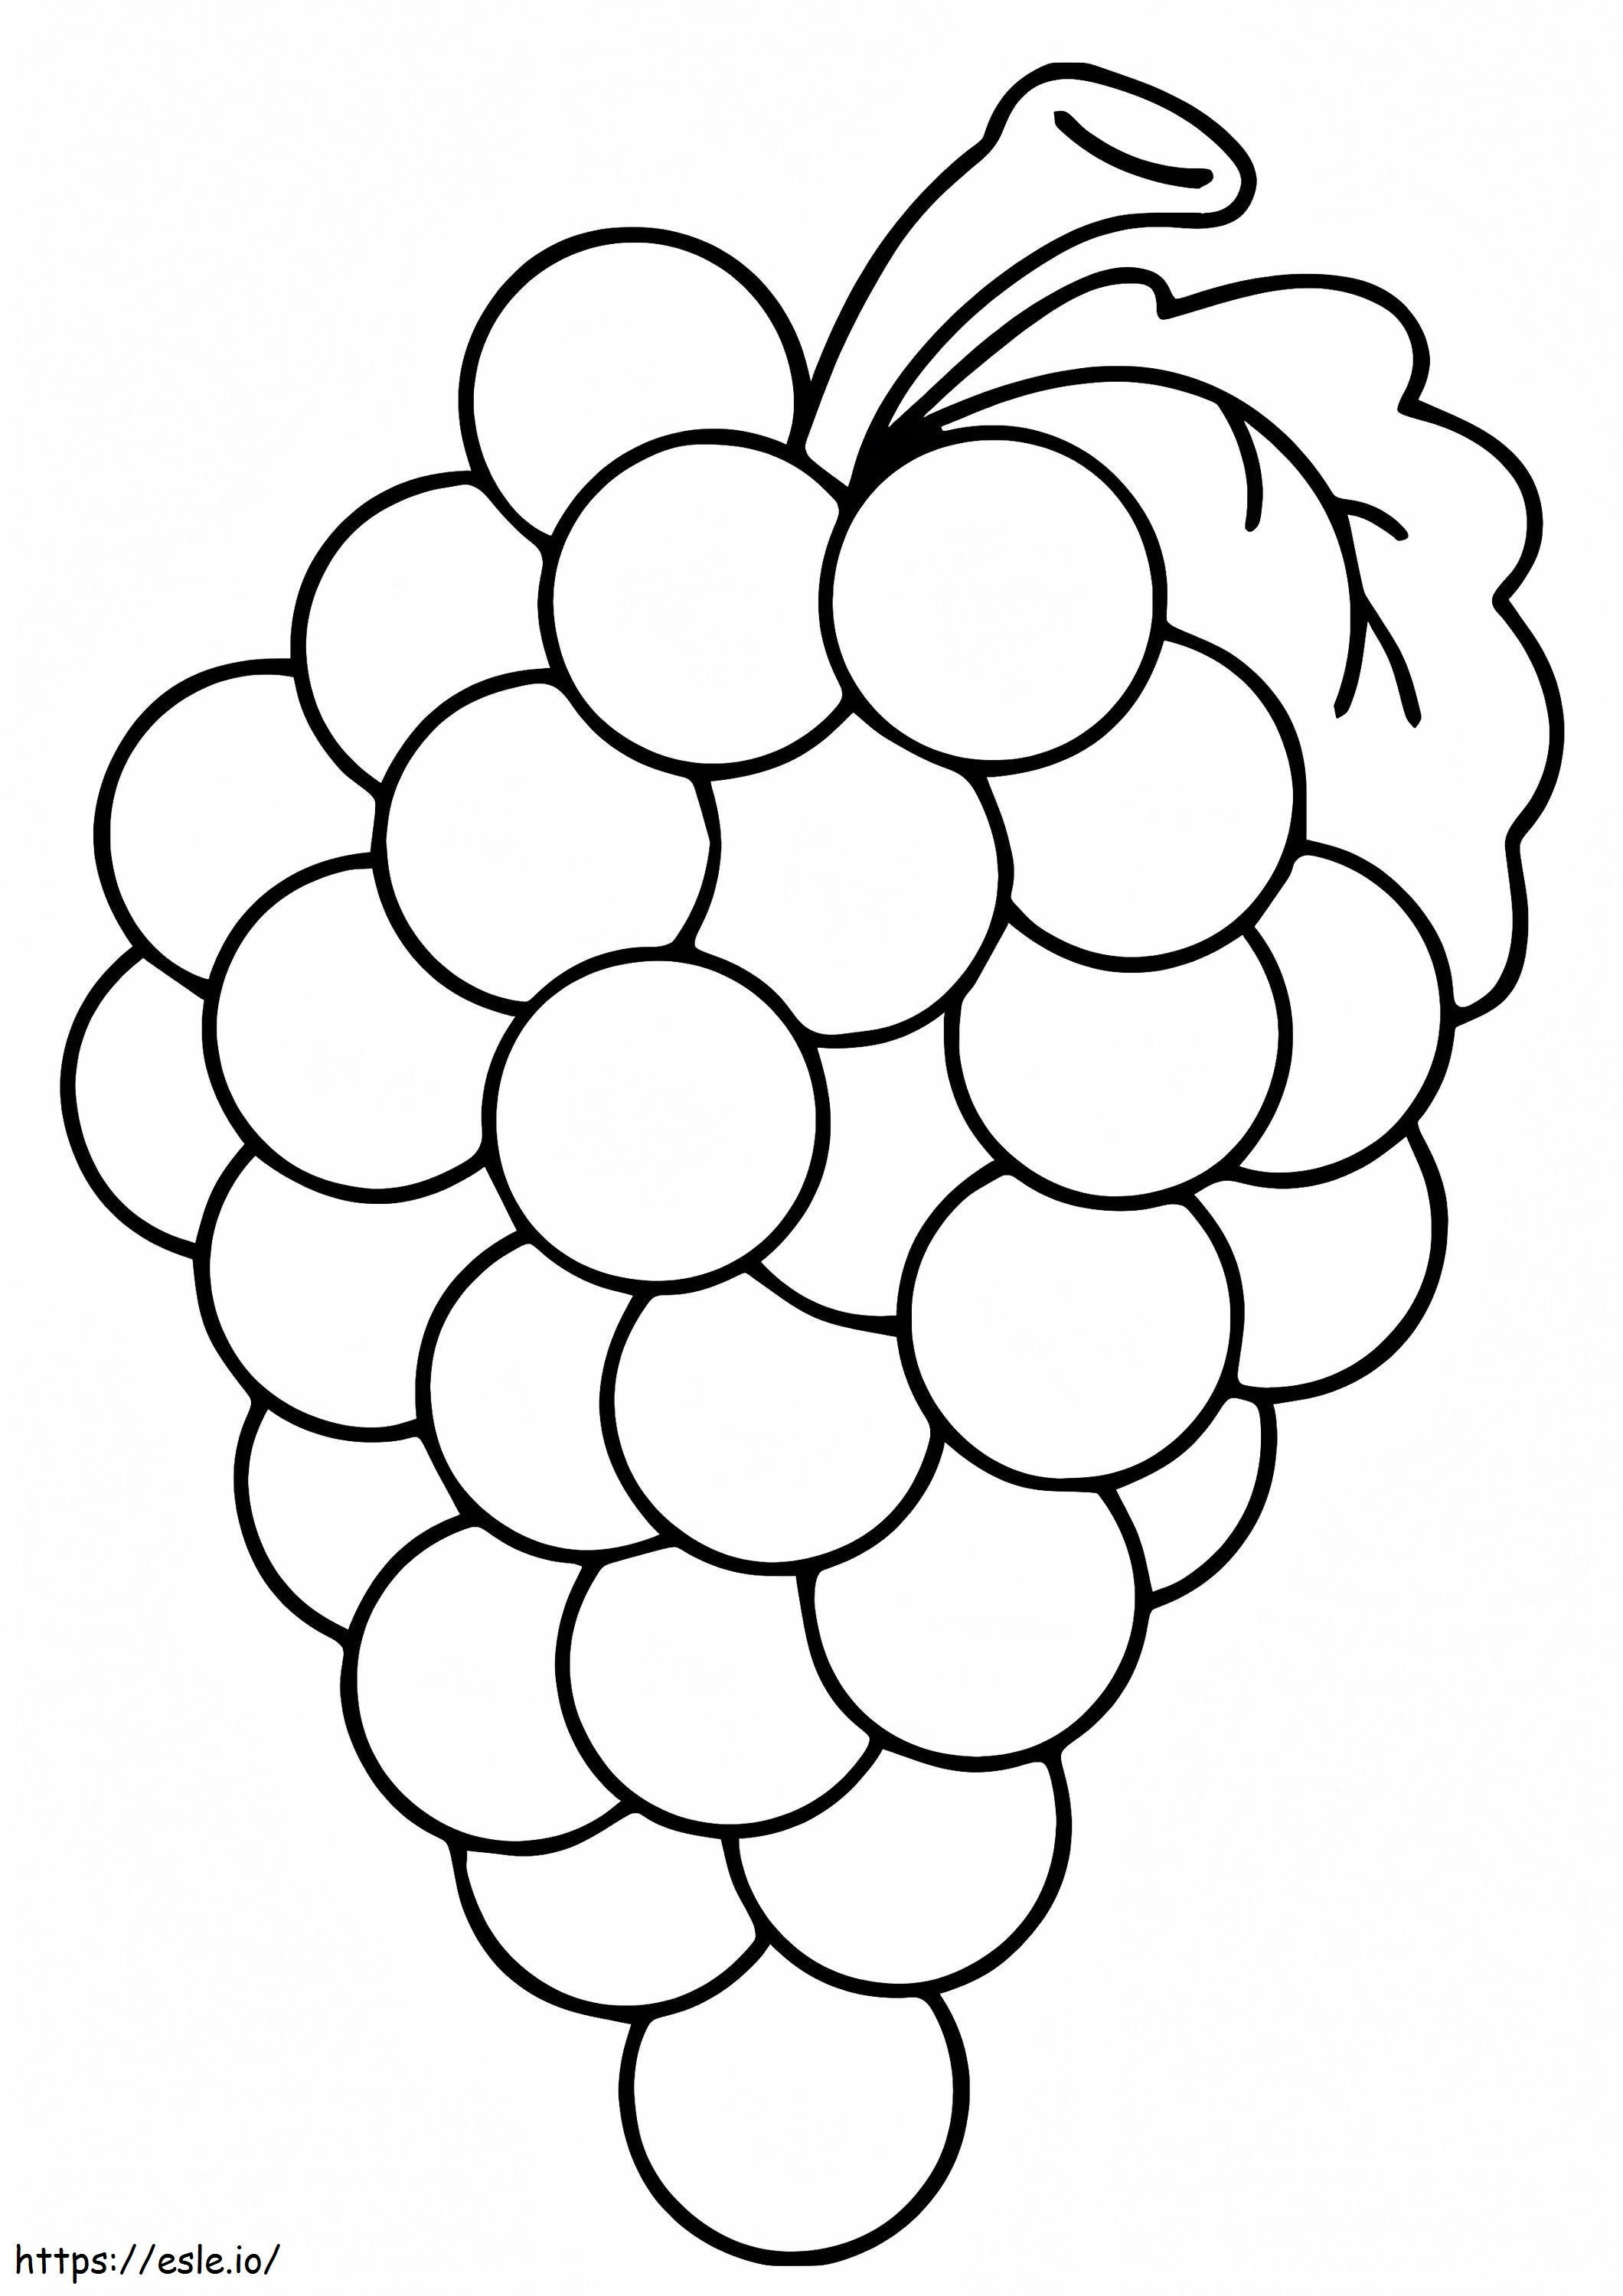 1528427711 A Lovely Grapes Color A4 coloring page